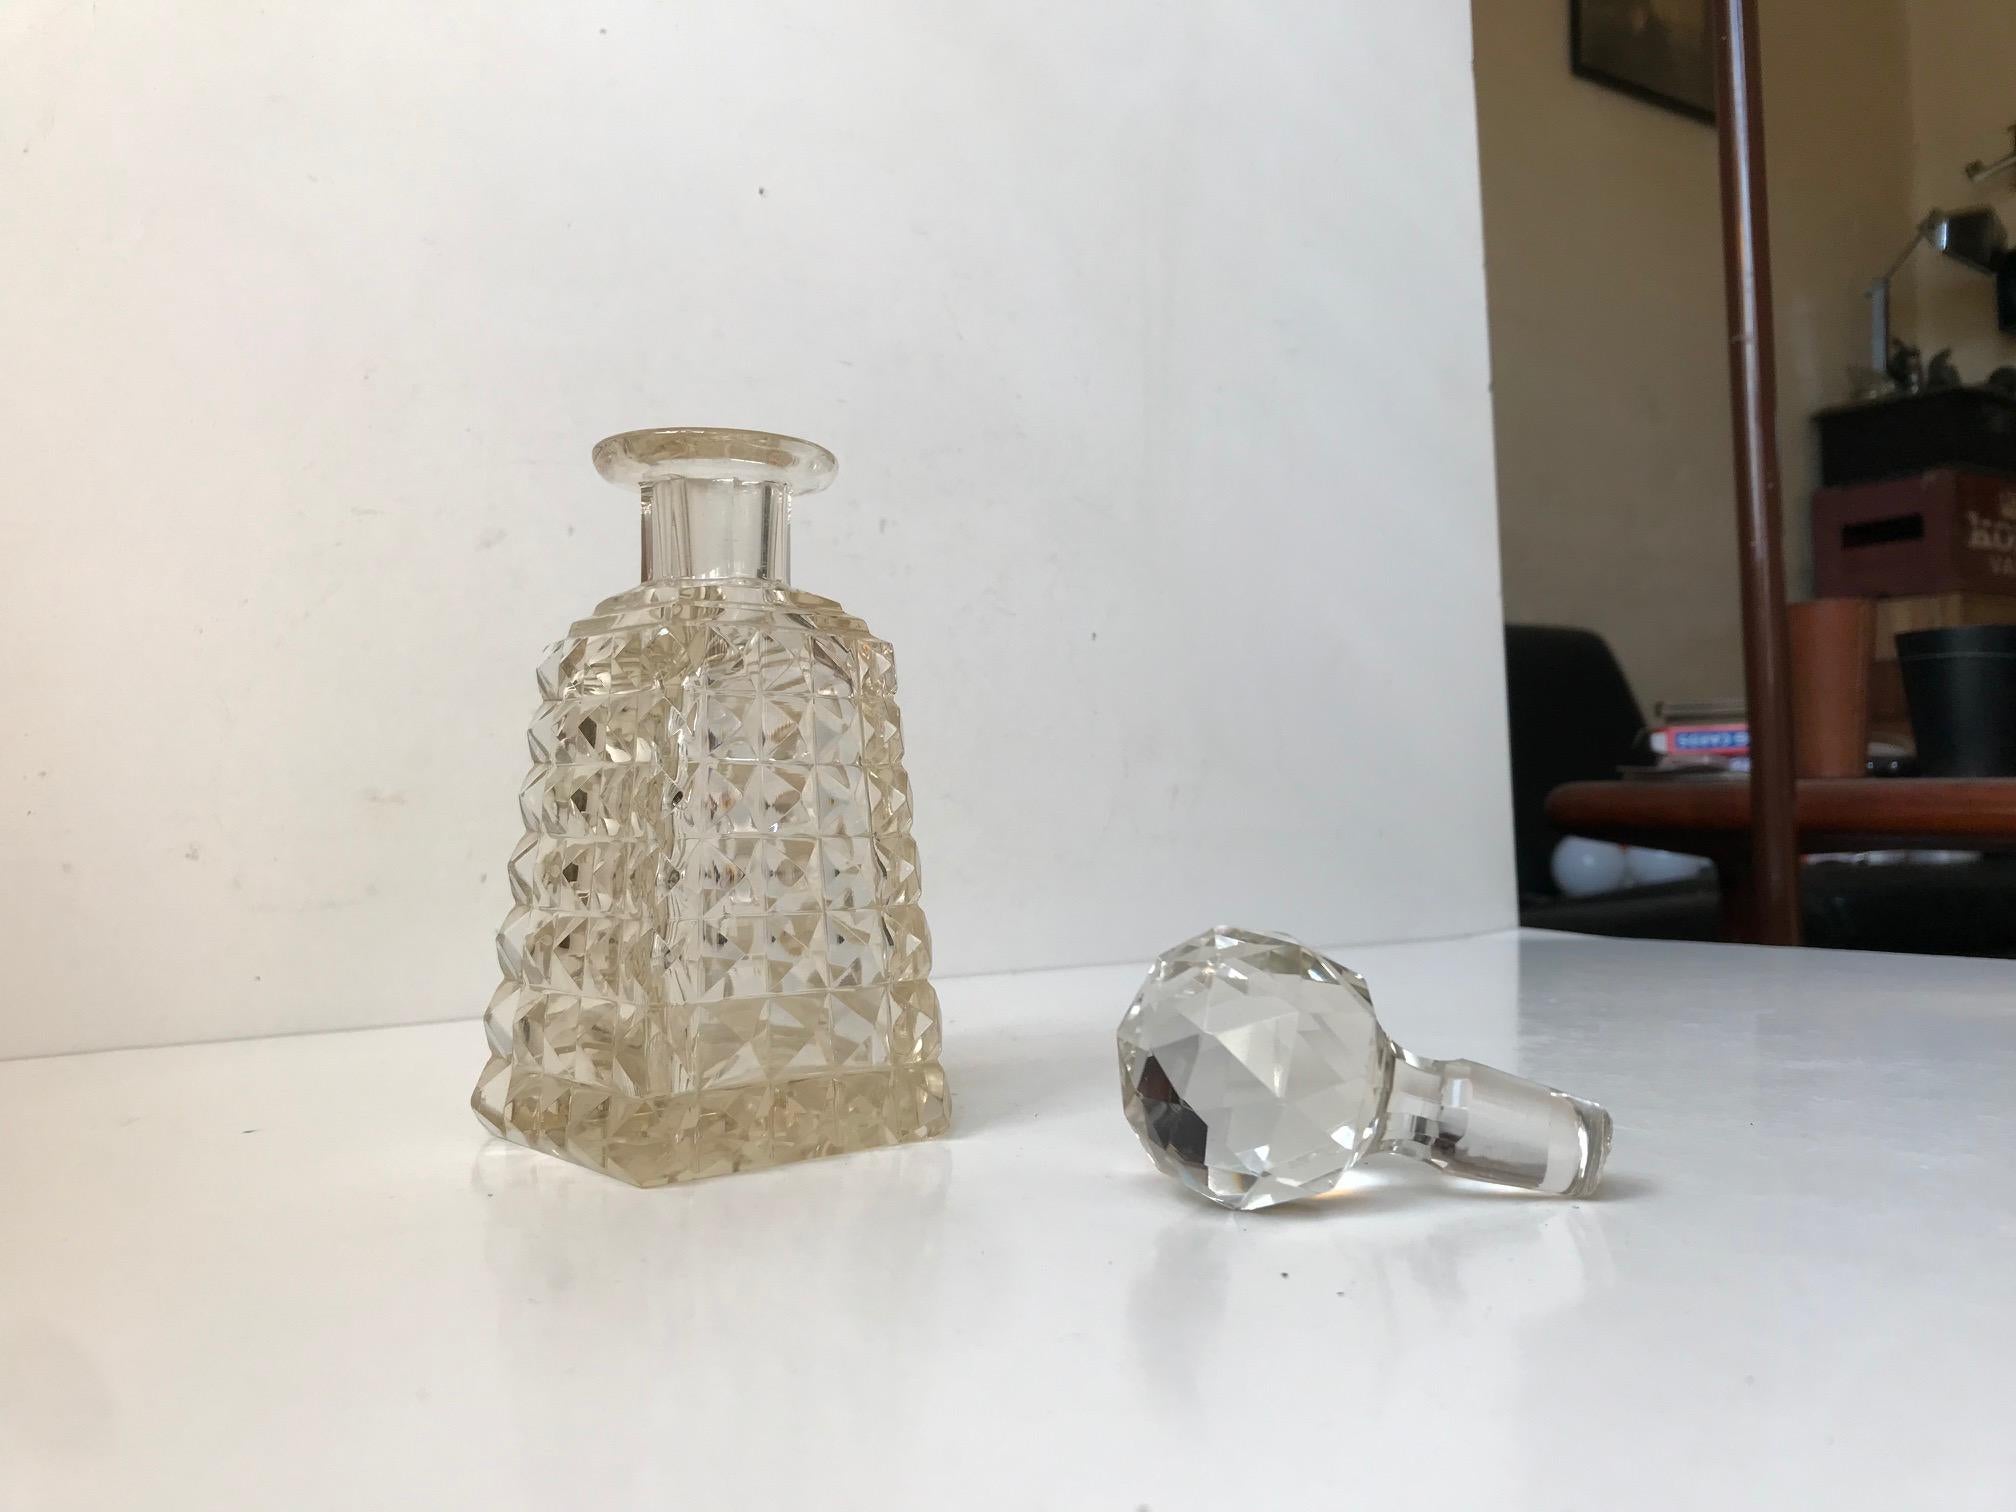 Small ornate crystal decanter cut with diamond patterns and set with a faceted spherical stopper. Probably made by Holmegaard in Denmark during the 1920s who alongside a few Czech makers used the edged star as marking beneath the base. It has a